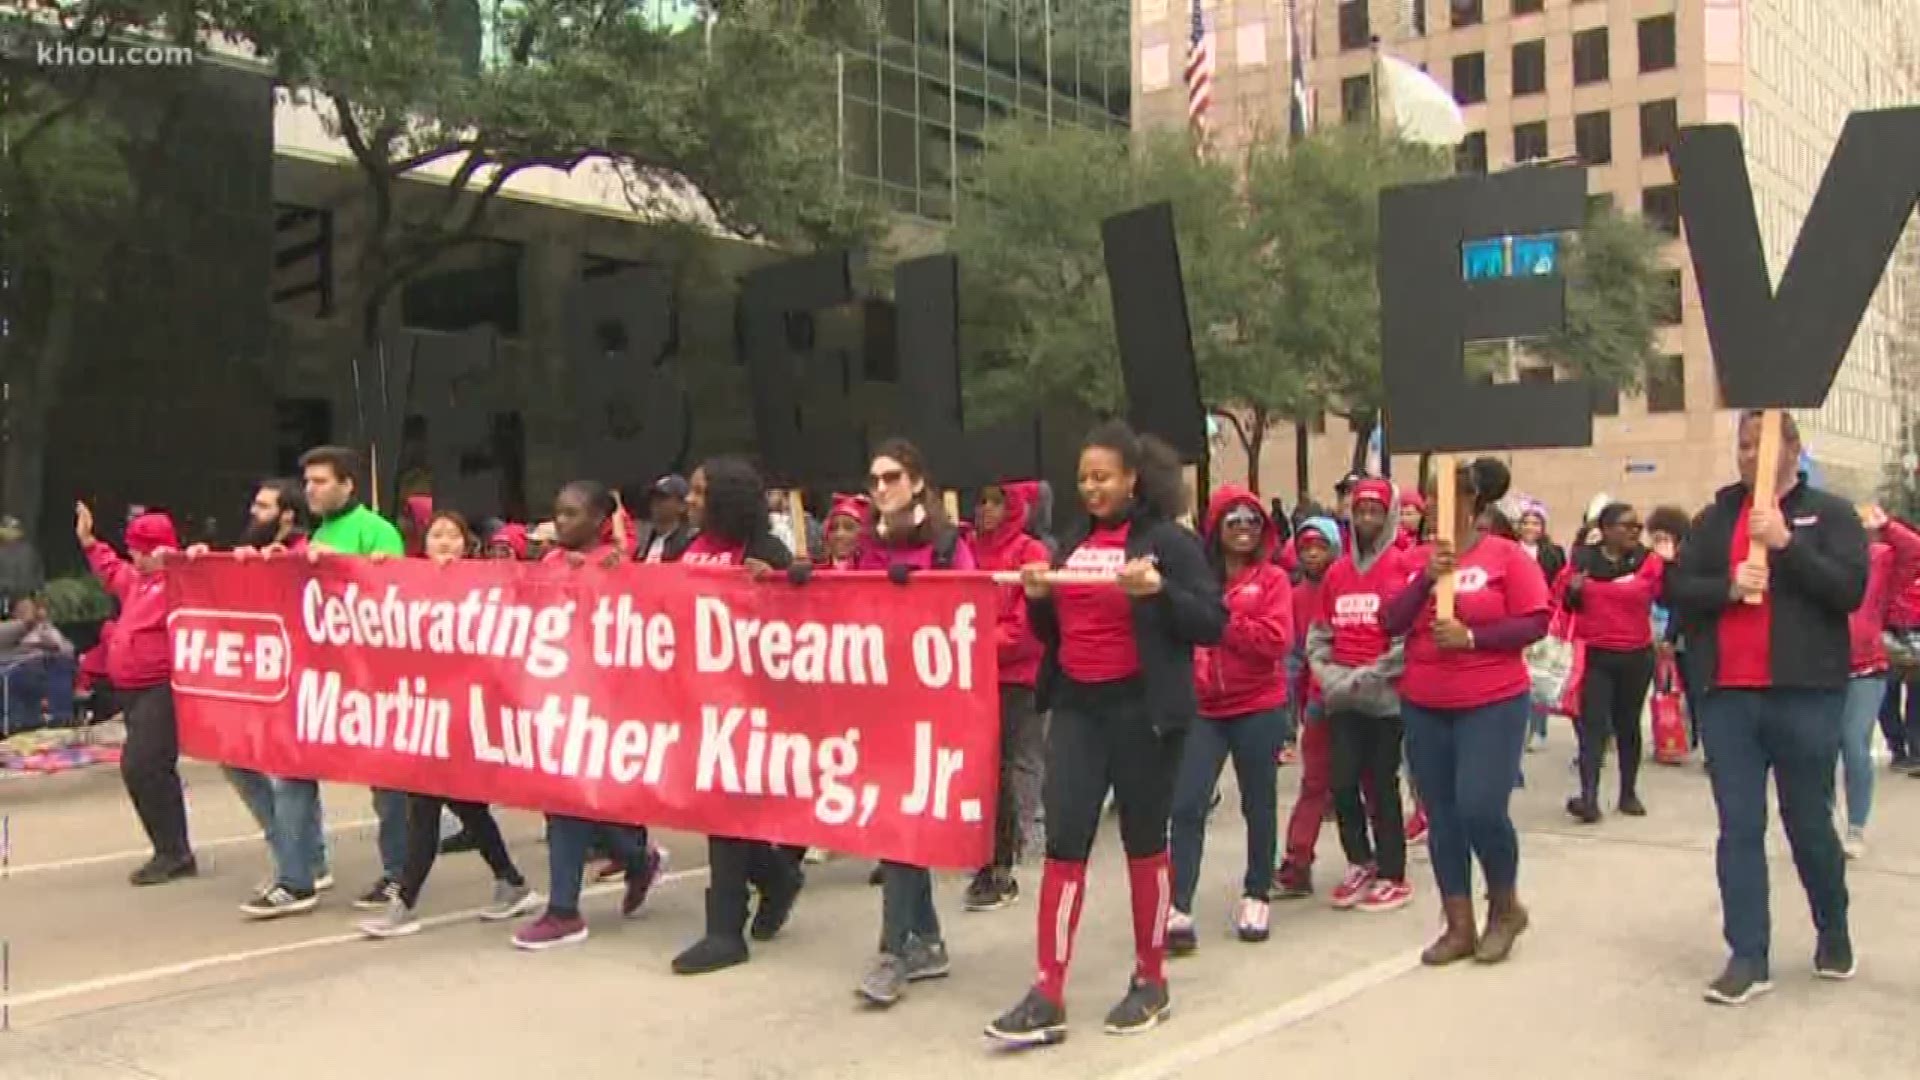 In Houston, MLK Day is celebrated with not one but two parades. The dueling parades happened despite the mayor's call for unity.